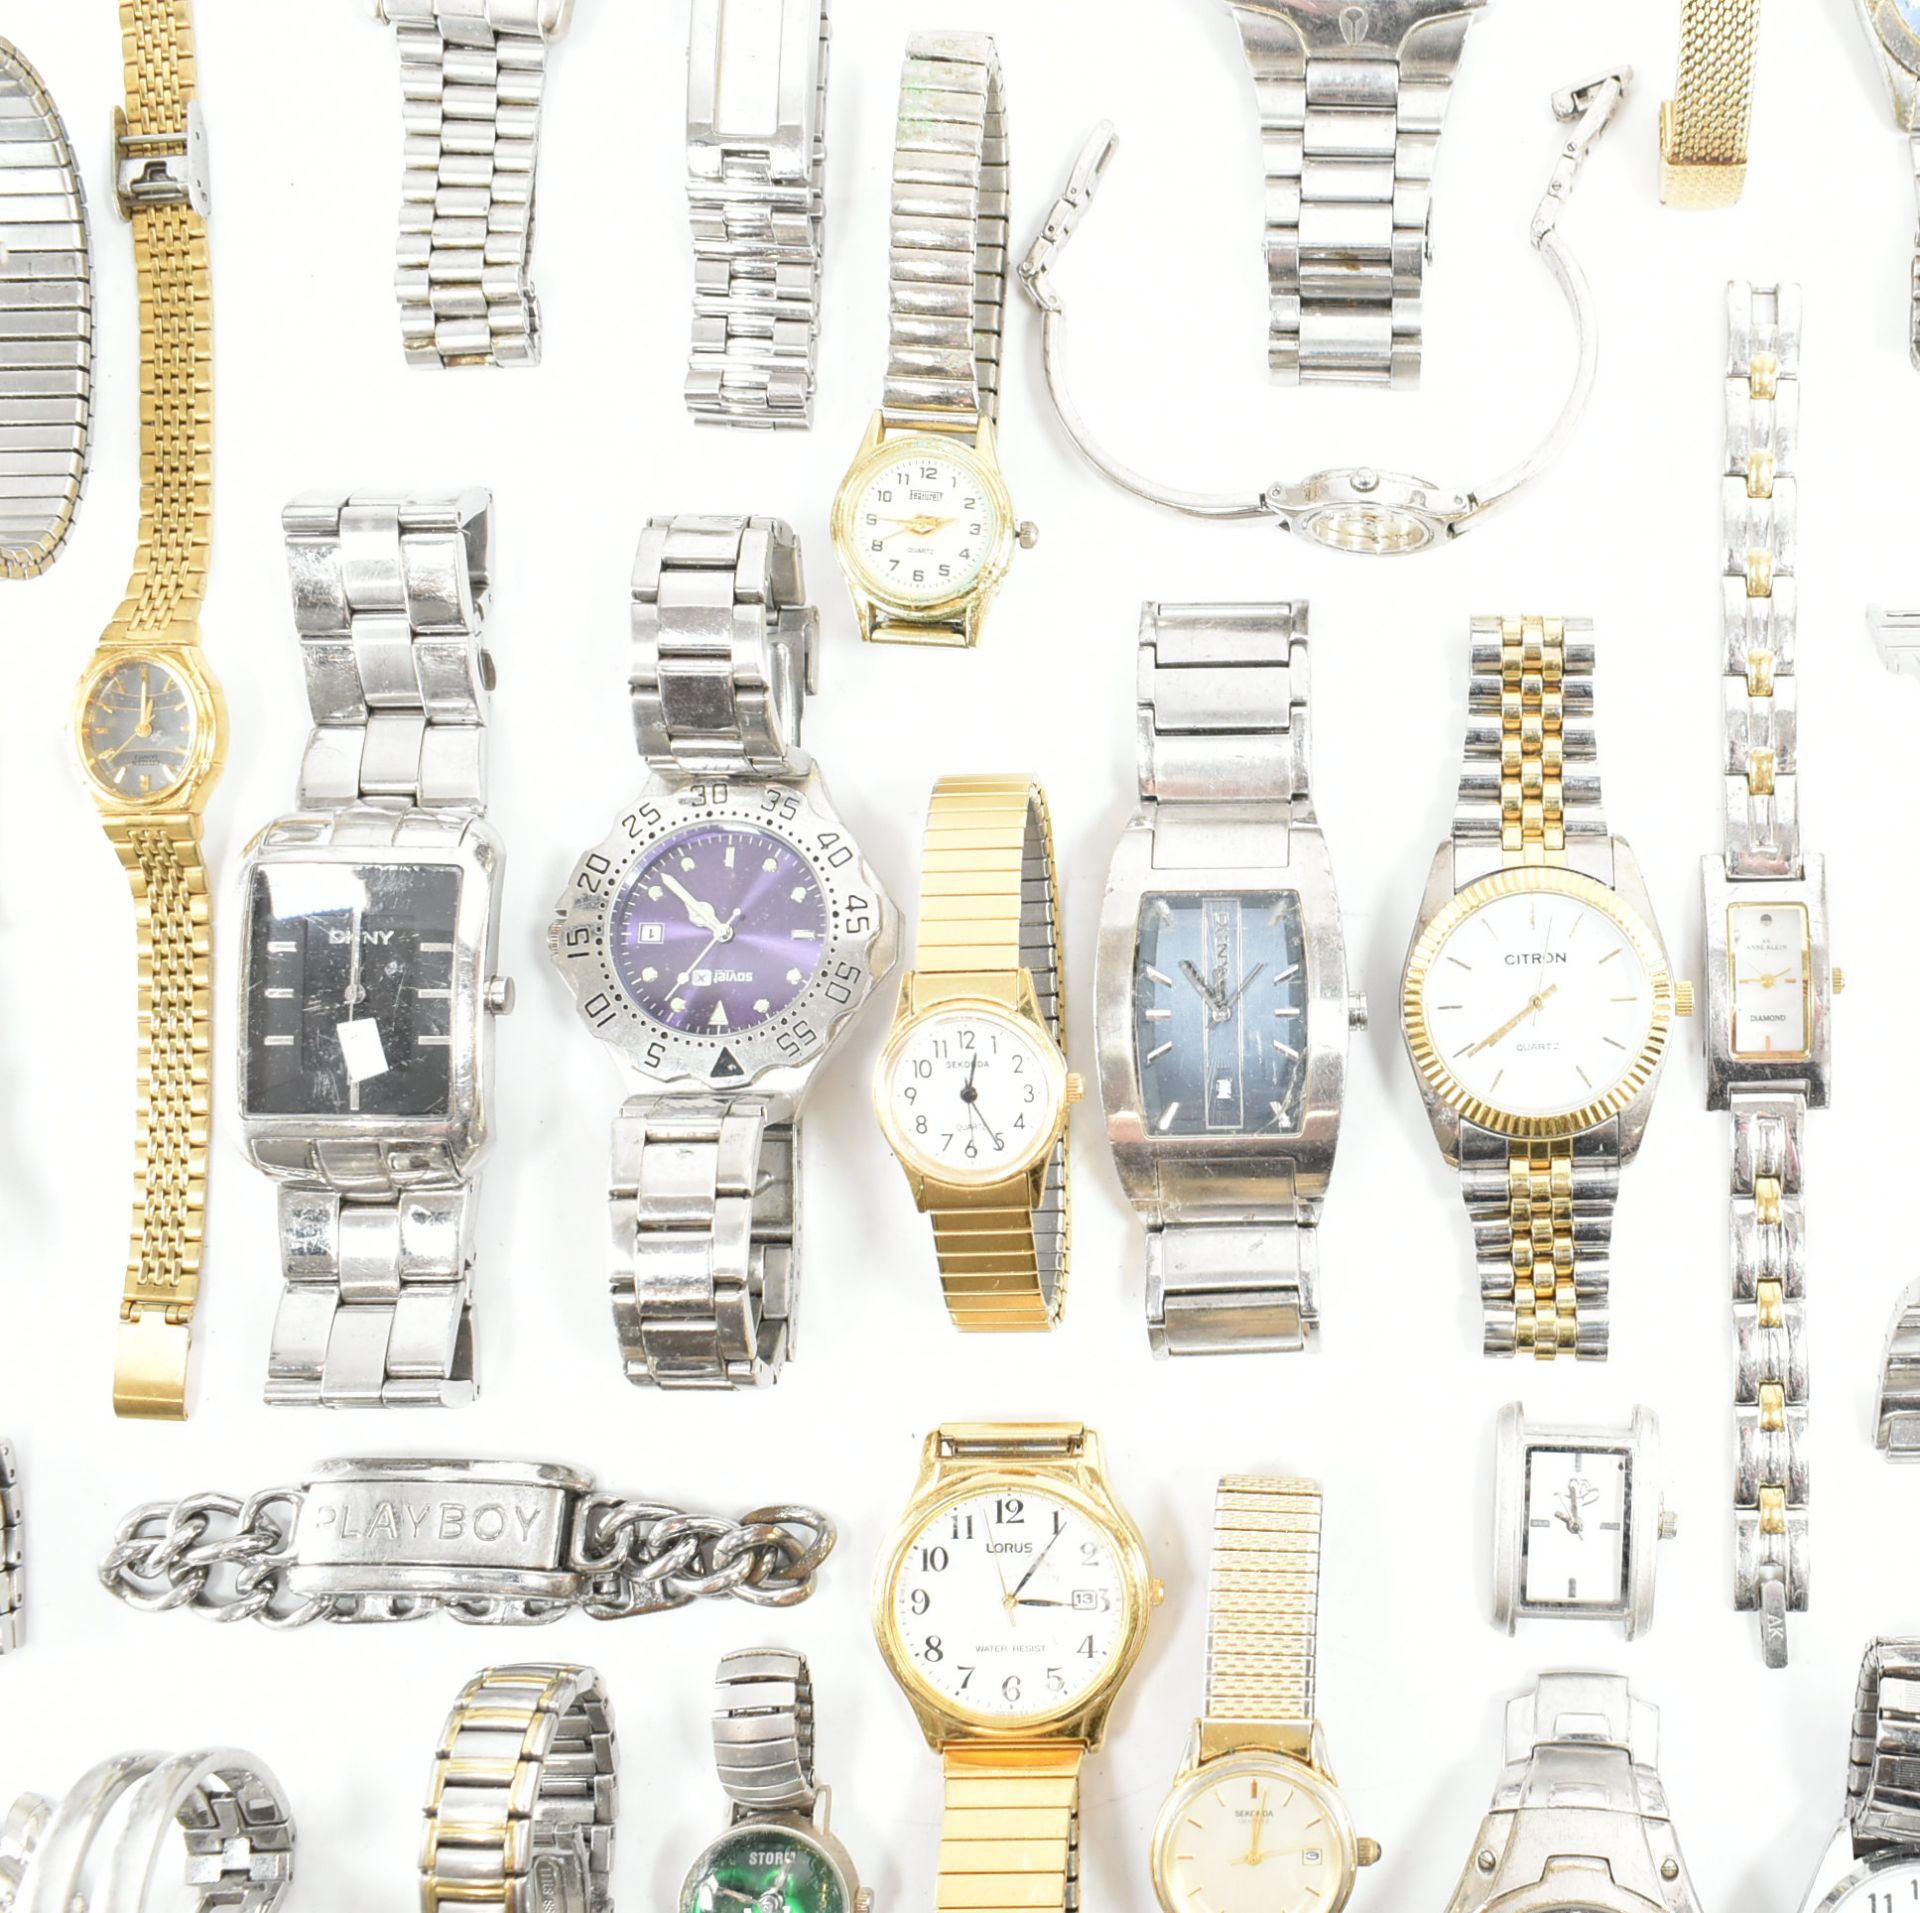 COLLECTION OF ASSORTED GOLD & SILVER TONE WRISTWATCHES